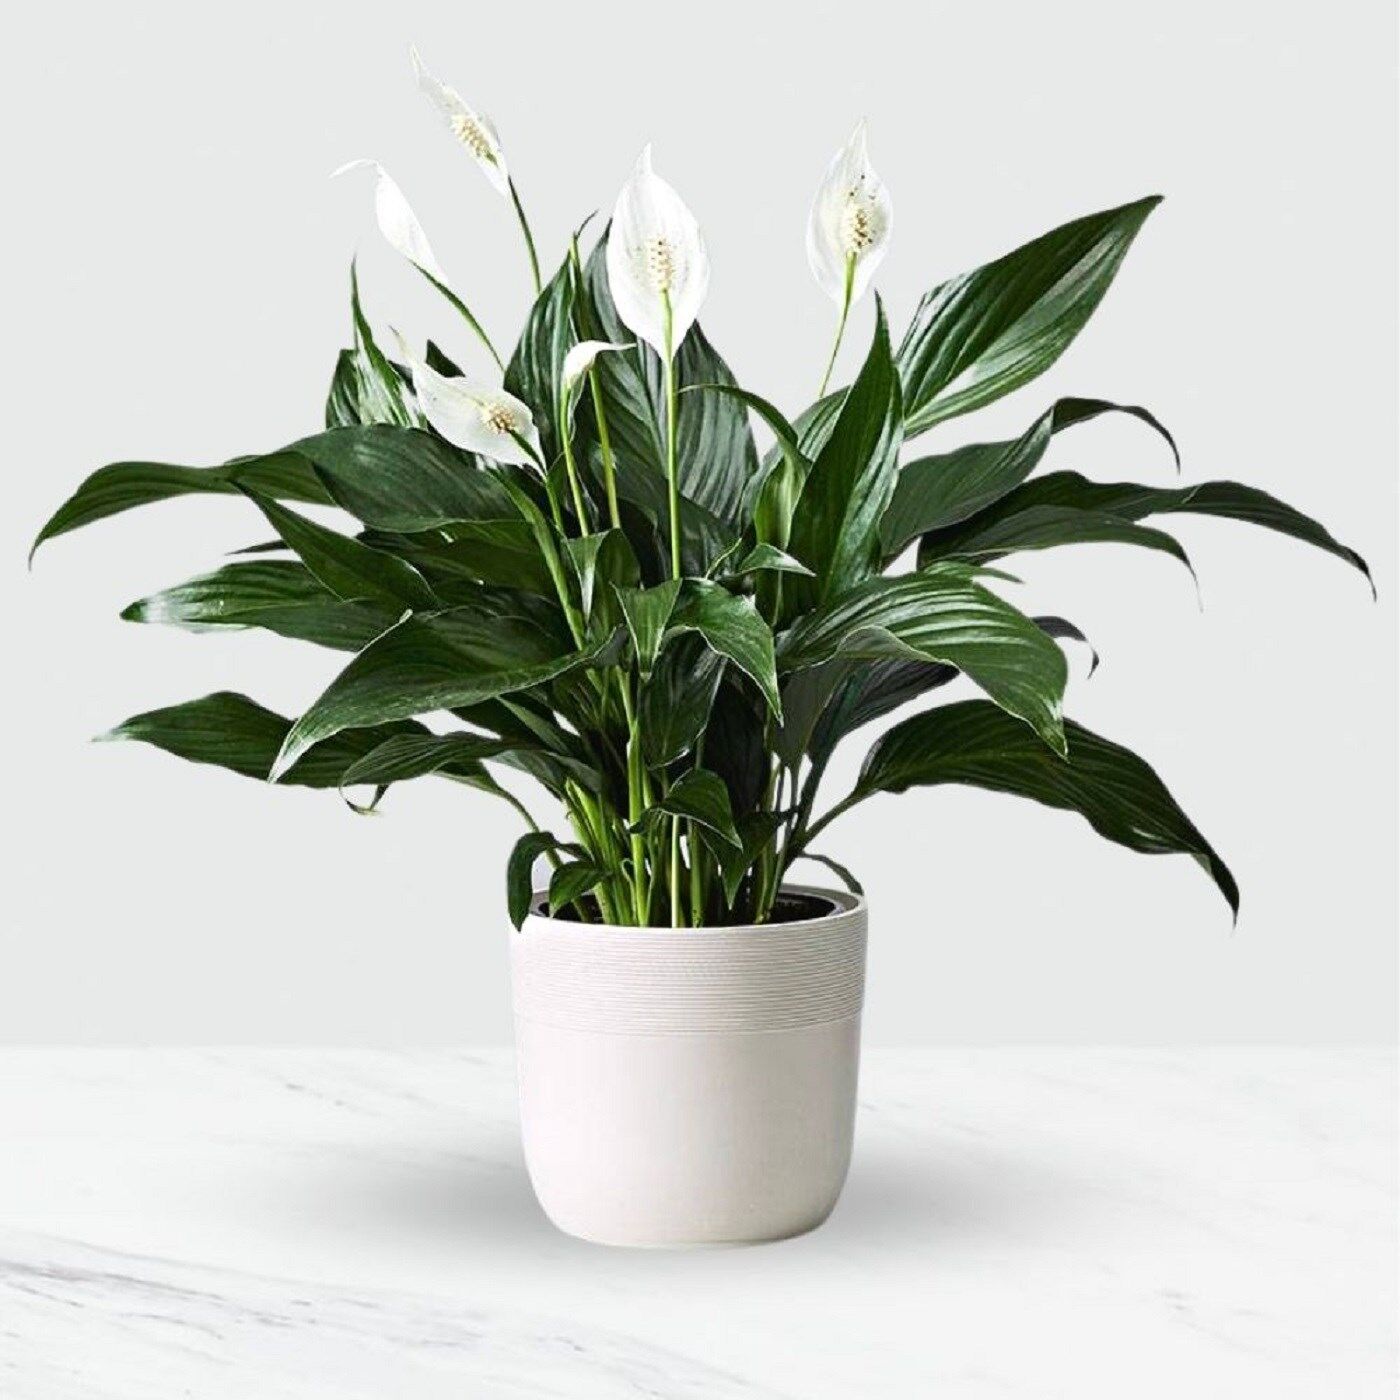 Potted Spathiphyllum